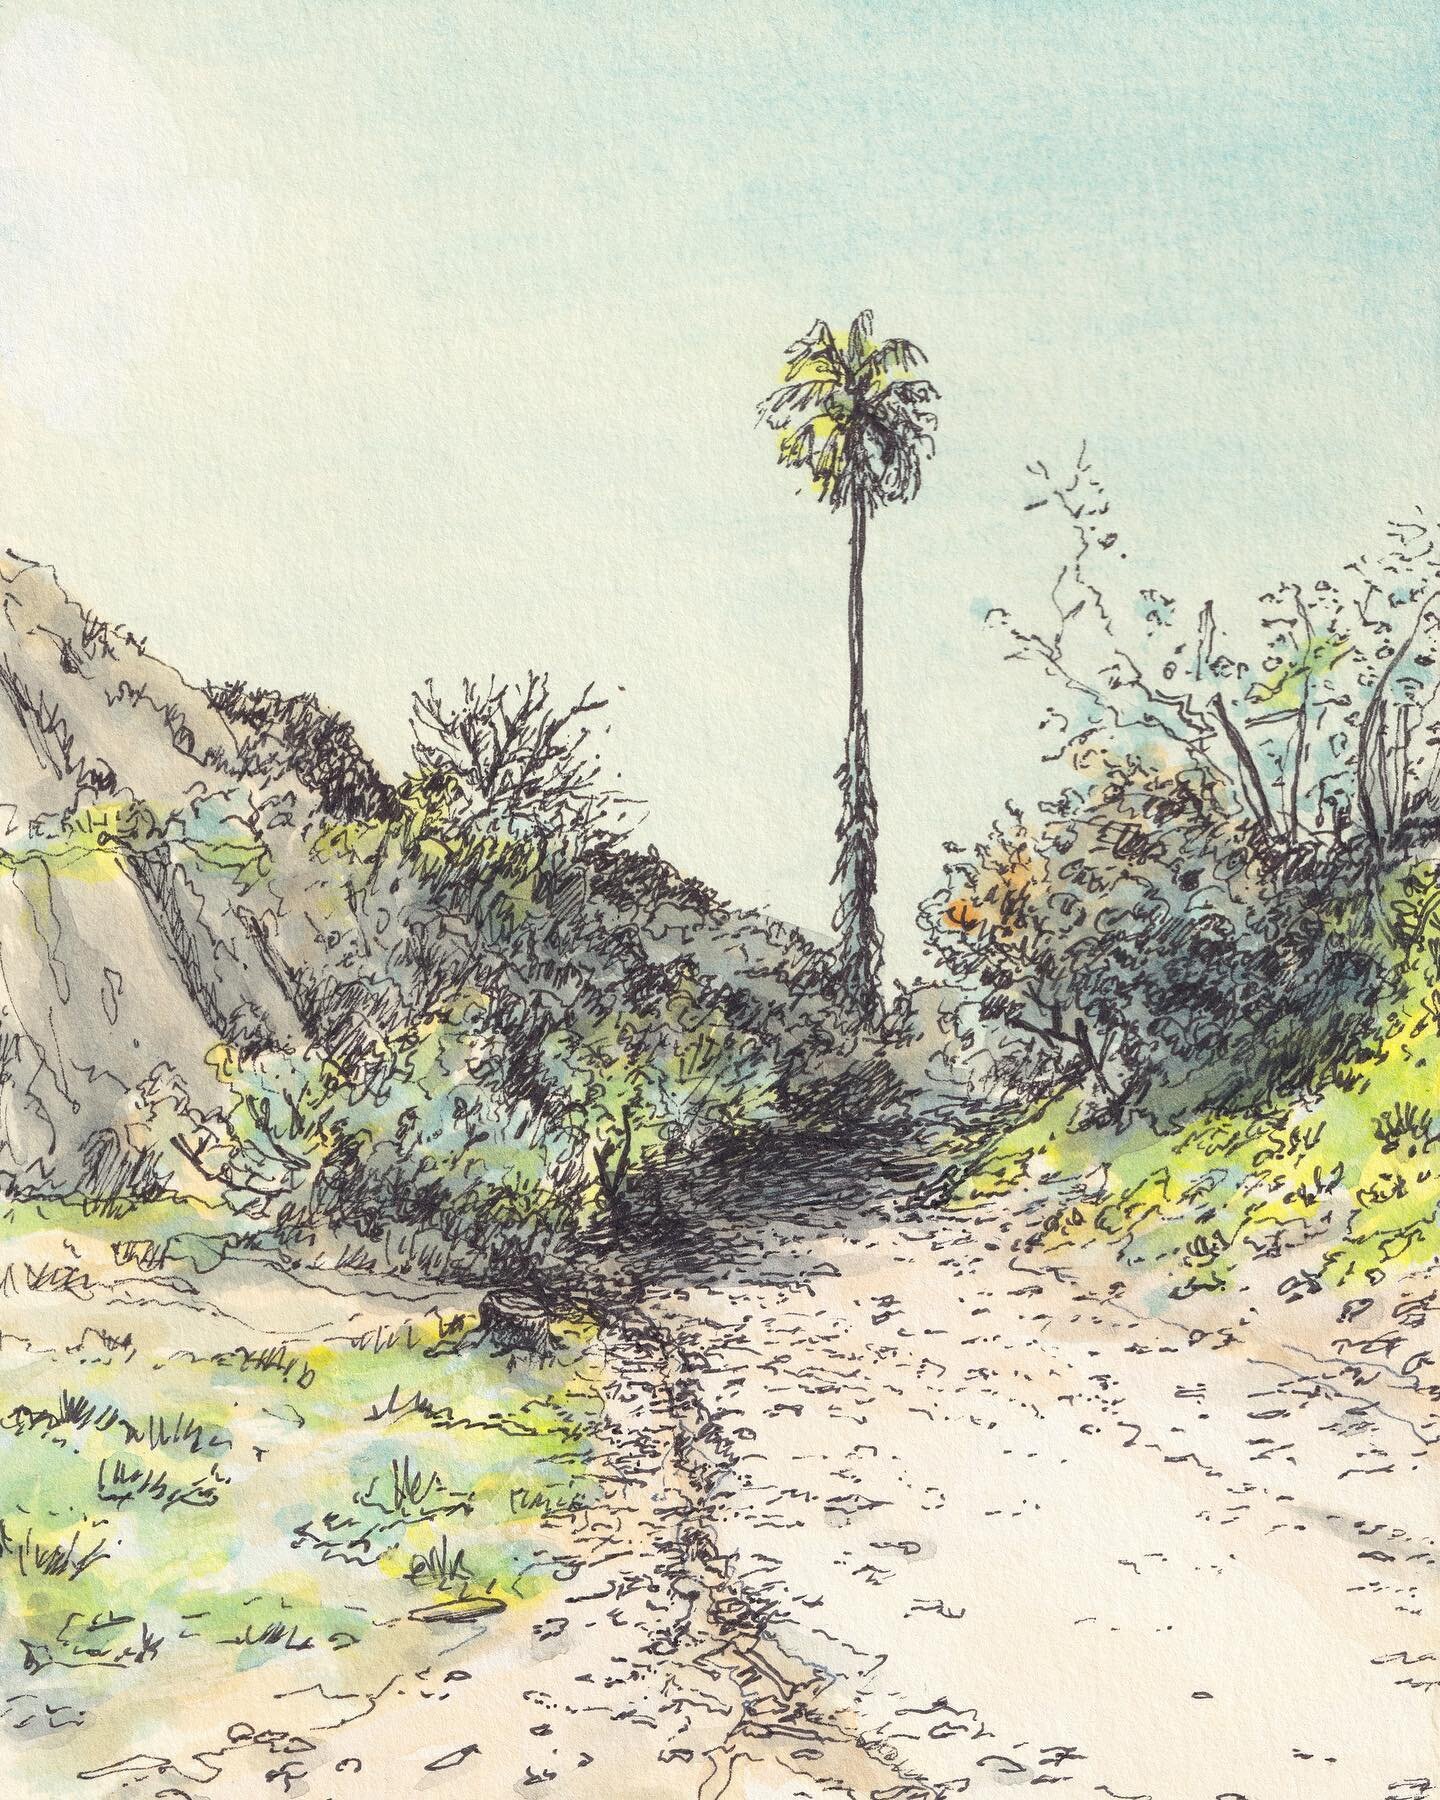 ___🌴___ a single palm tree at the end of the road.&nbsp;
&bull;
4.7 x 6.3 in (16 x 12cm)
Ink pen &amp; gouache on archival museum board (4 ply)
&bull;
#drawing #city #tongvaland #California #USA #illustration #documents #ink #pen #gouache #drawing #